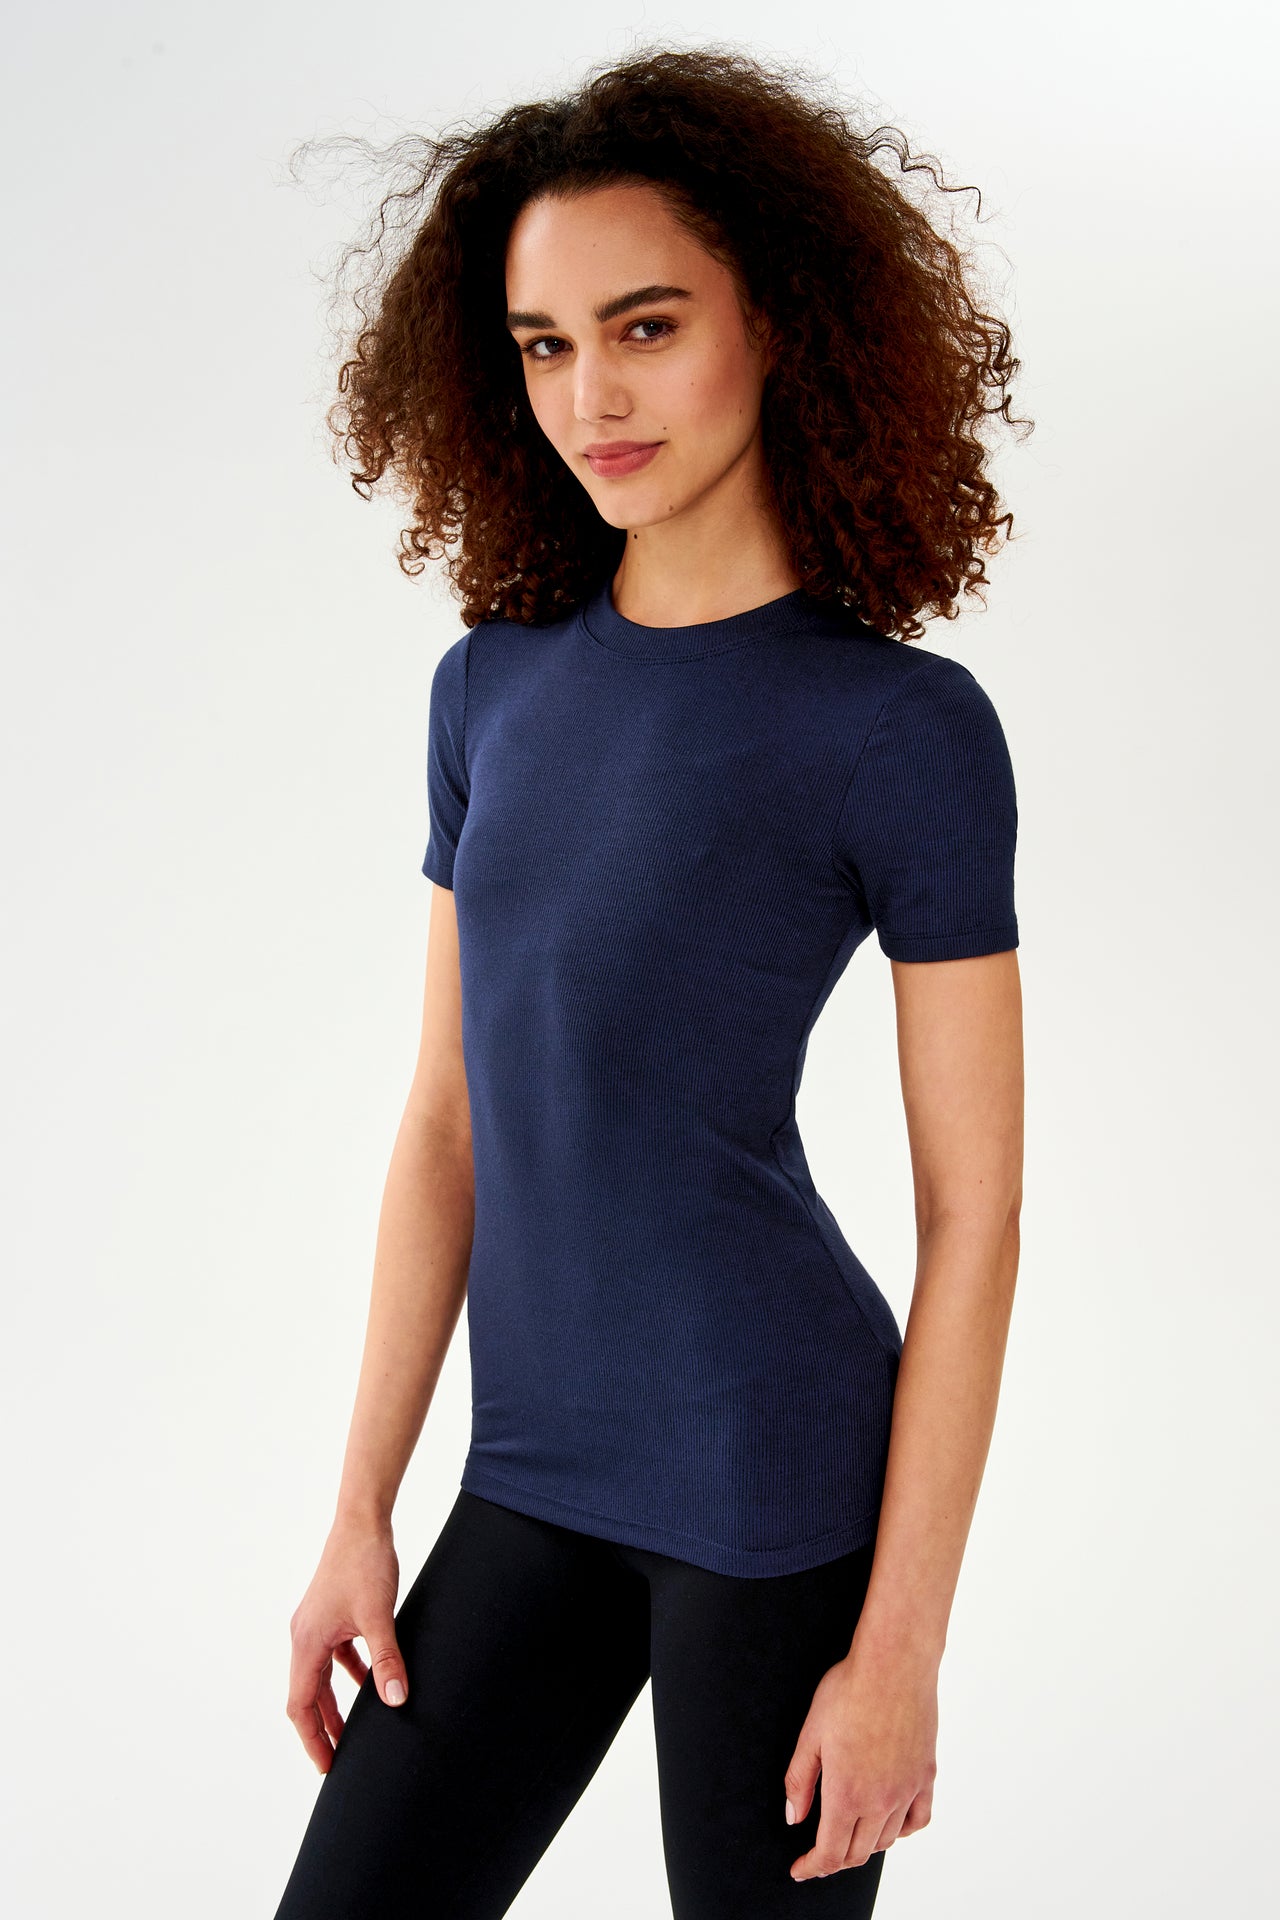 A woman wearing a SPLITS59 Louise Rib Short Sleeve in Indigo and black leggings is ready for her yoga session.